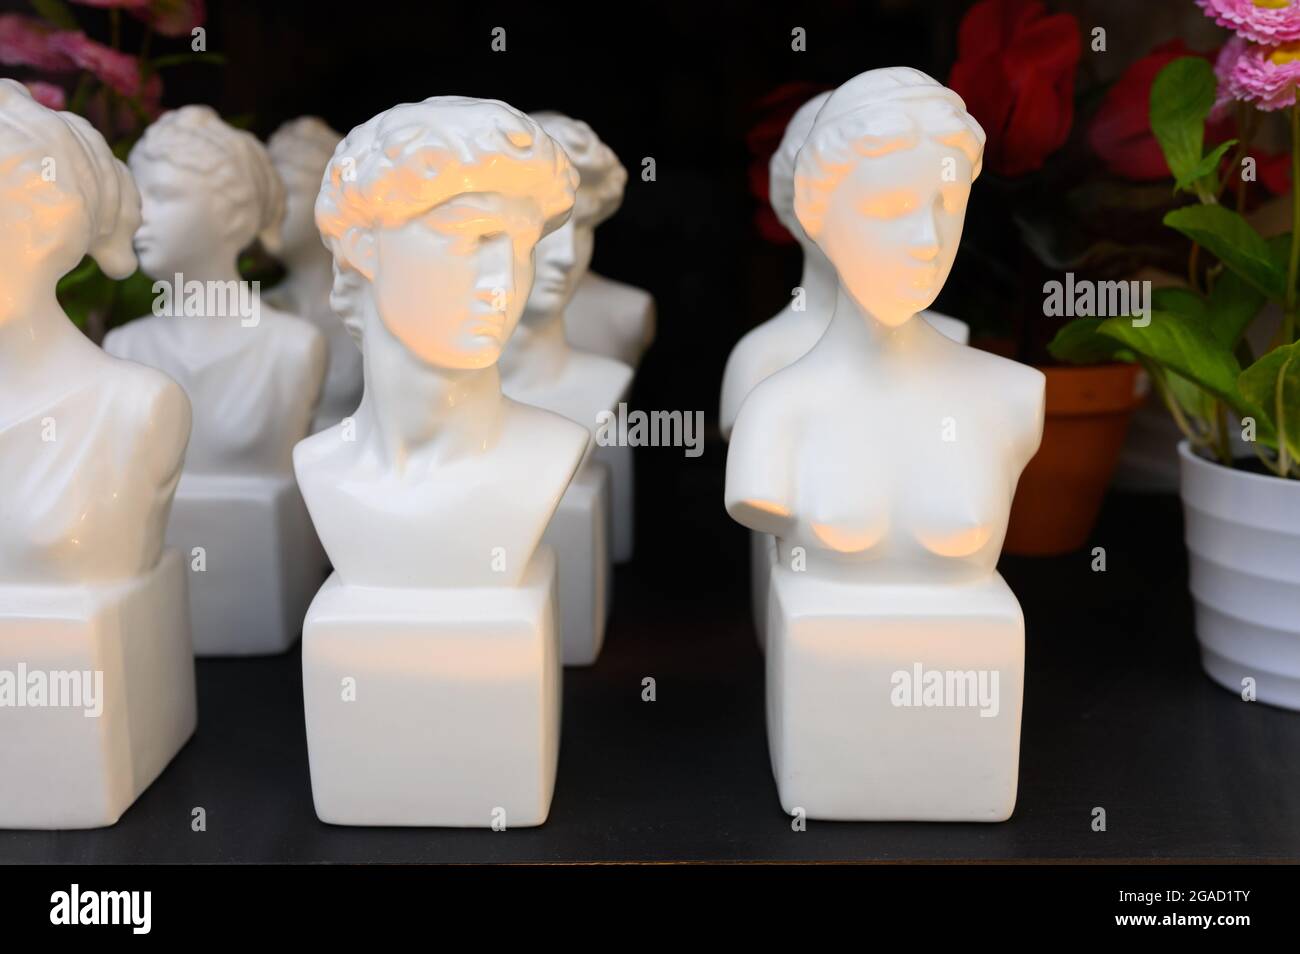 Miniature ceramic busts in a shop window. Stock Photo